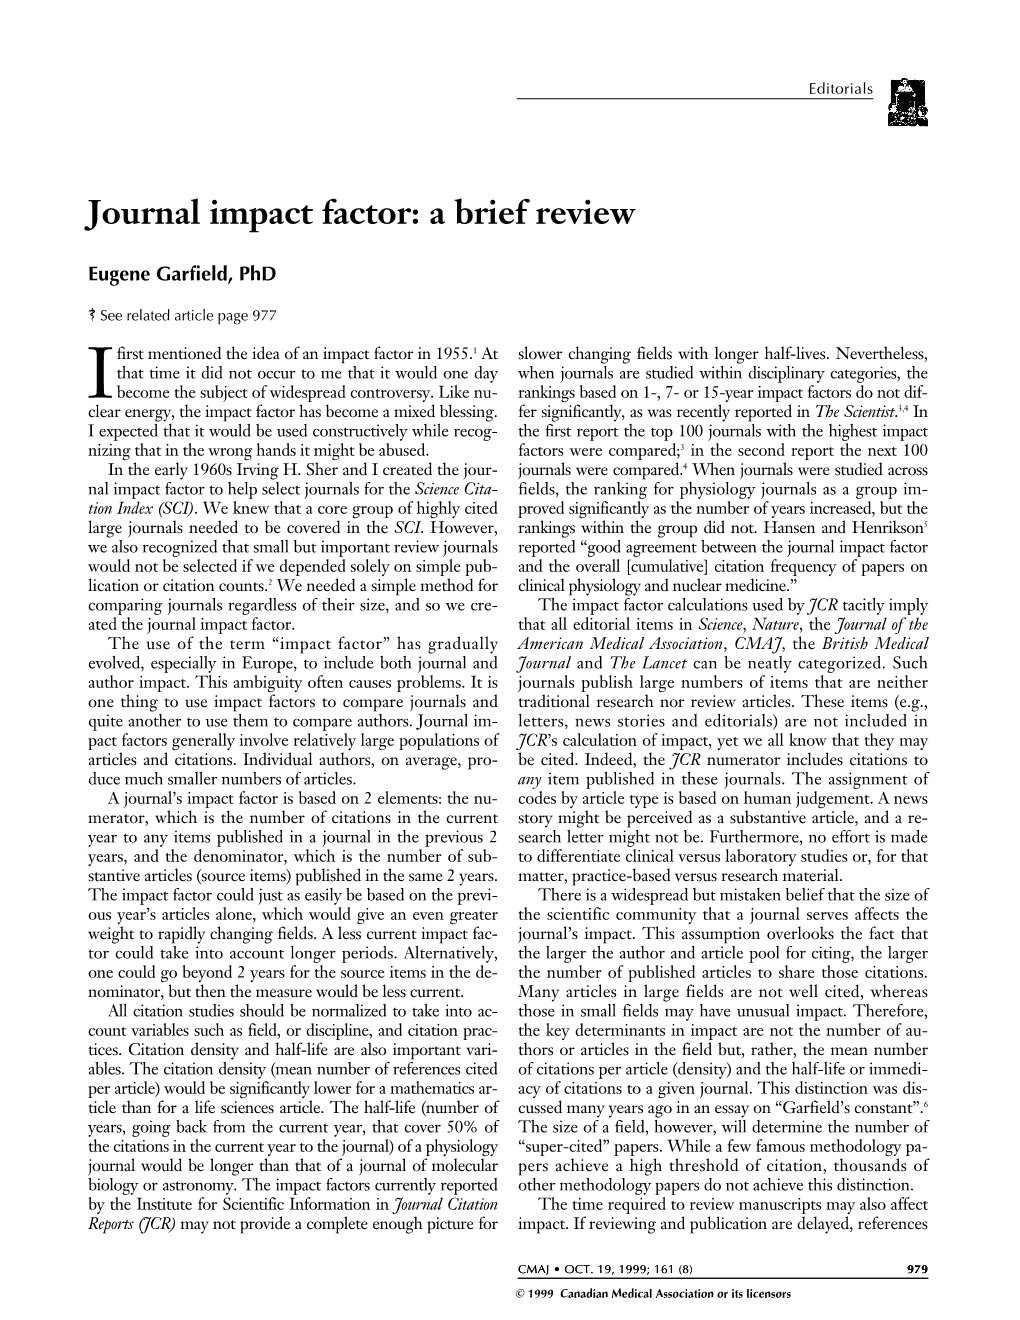 Journal Impact Factor: a Brief Review